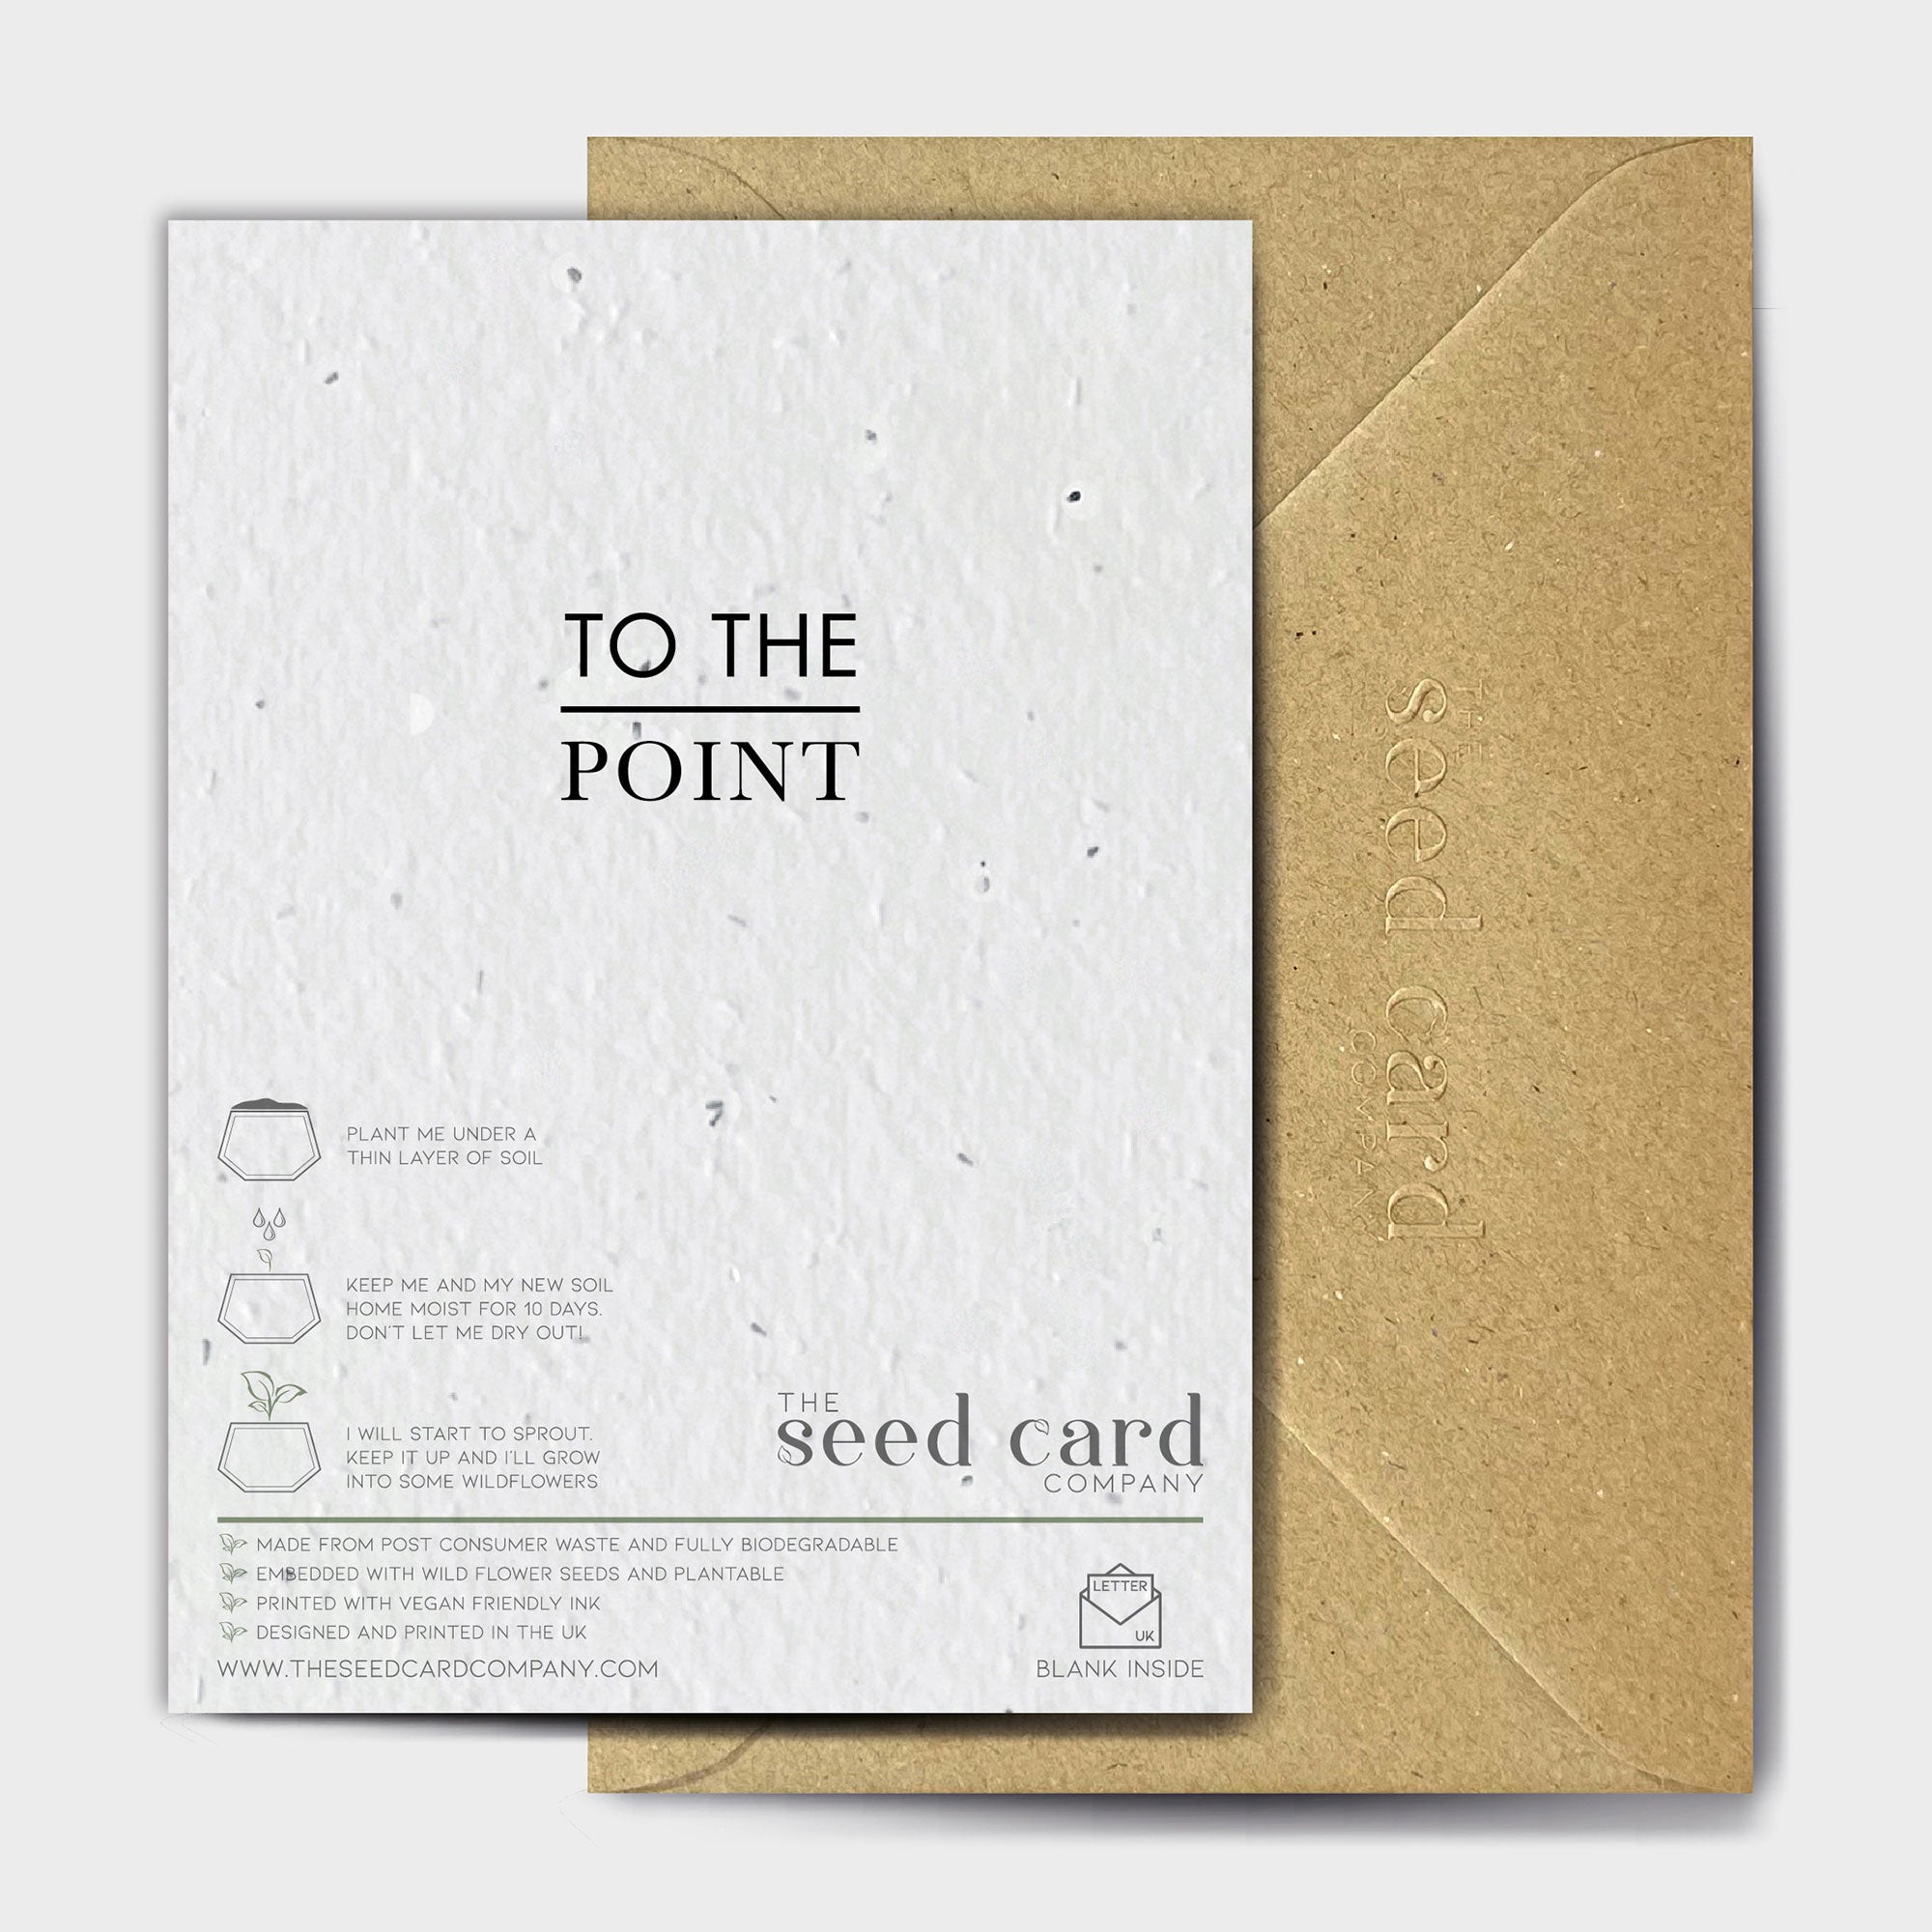 Shop online Take This As A Warning - 100% biodegradable seed-embedded cards Shop -The Seed Card Company